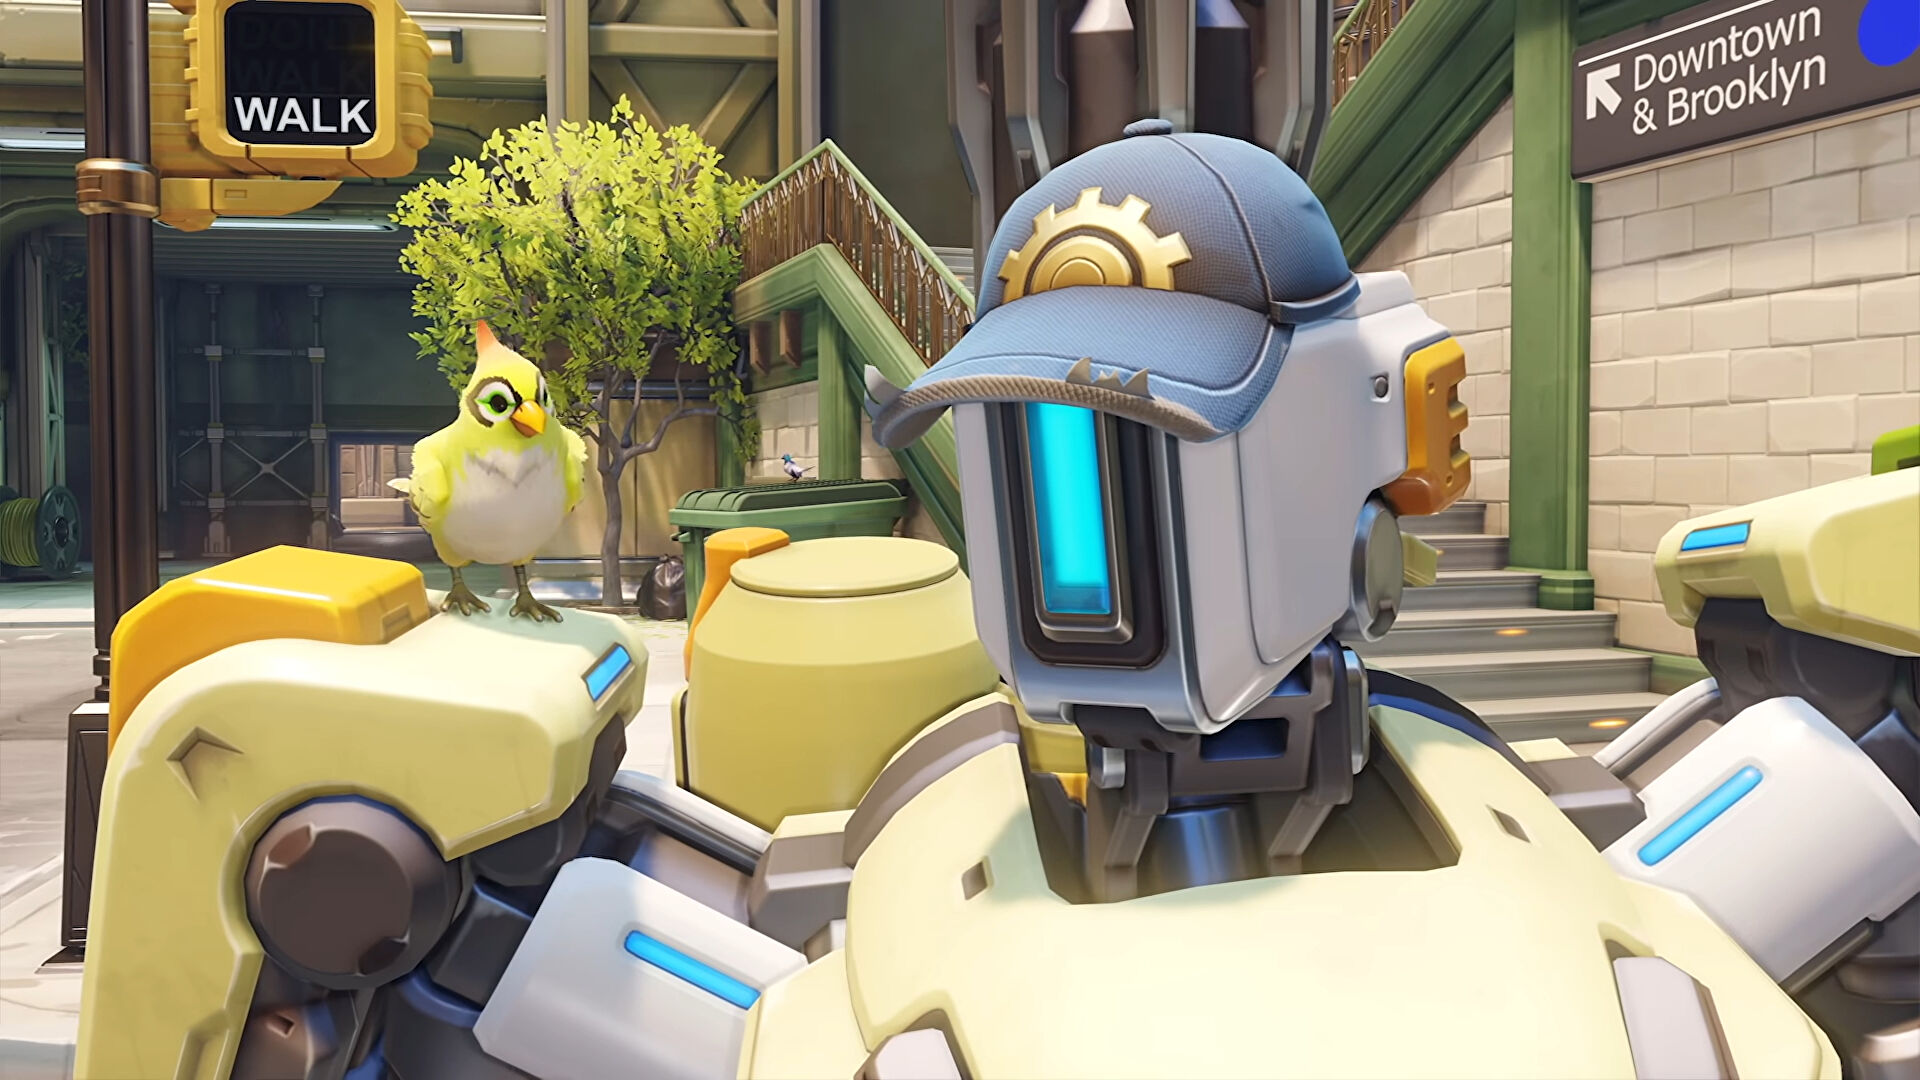 Blizzard and Overwatch 2 struck by third DDoS attack in a week